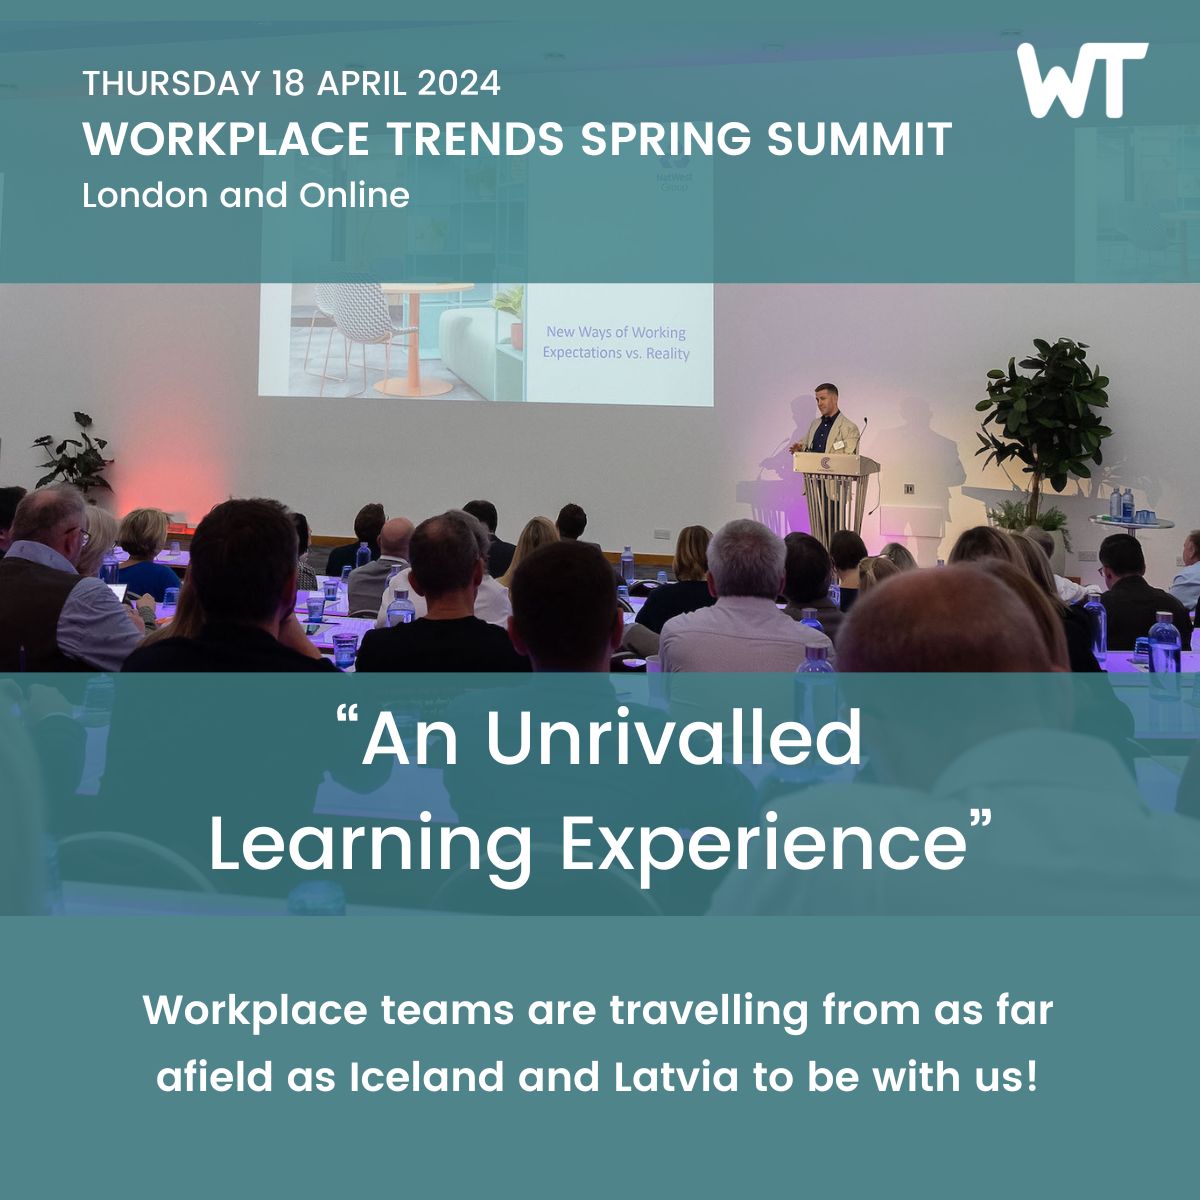 Fantastic response from our international audience! Including teams from Iceland, Lativa and Ireland all making the journey to join the #Workplace Trends Spring Summit #WTSS24 in person. Check out who you could meet there at workplacetrends.co/events/wtss24-…